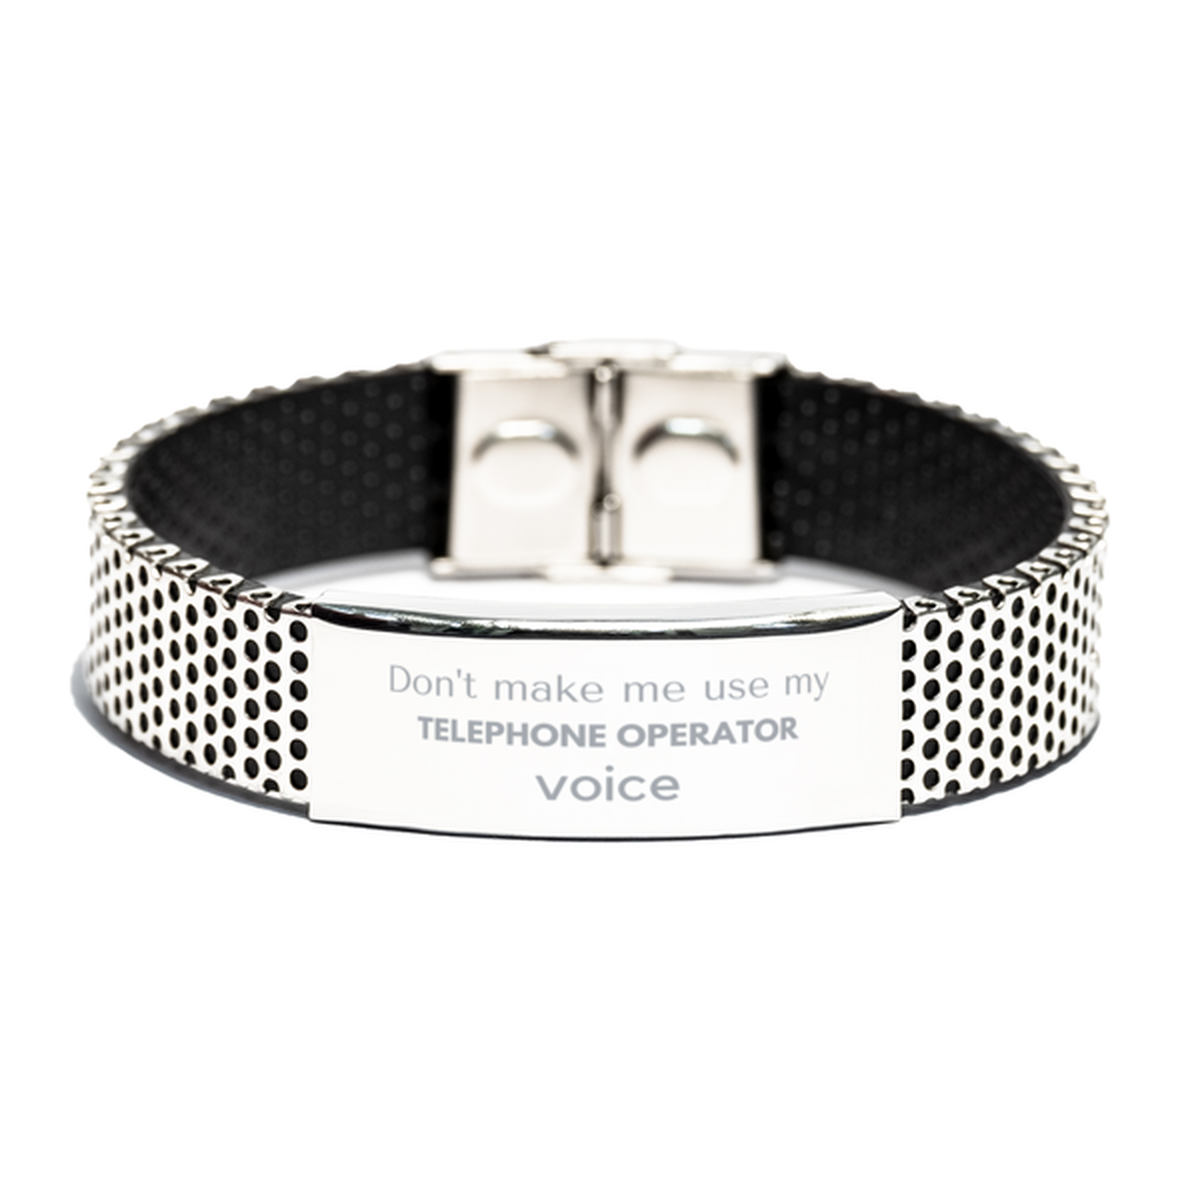 Don't make me use my Telephone Operator voice, Sarcasm Telephone Operator Gifts, Christmas Telephone Operator Stainless Steel Bracelet Birthday Unique Gifts For Telephone Operator Coworkers, Men, Women, Colleague, Friends